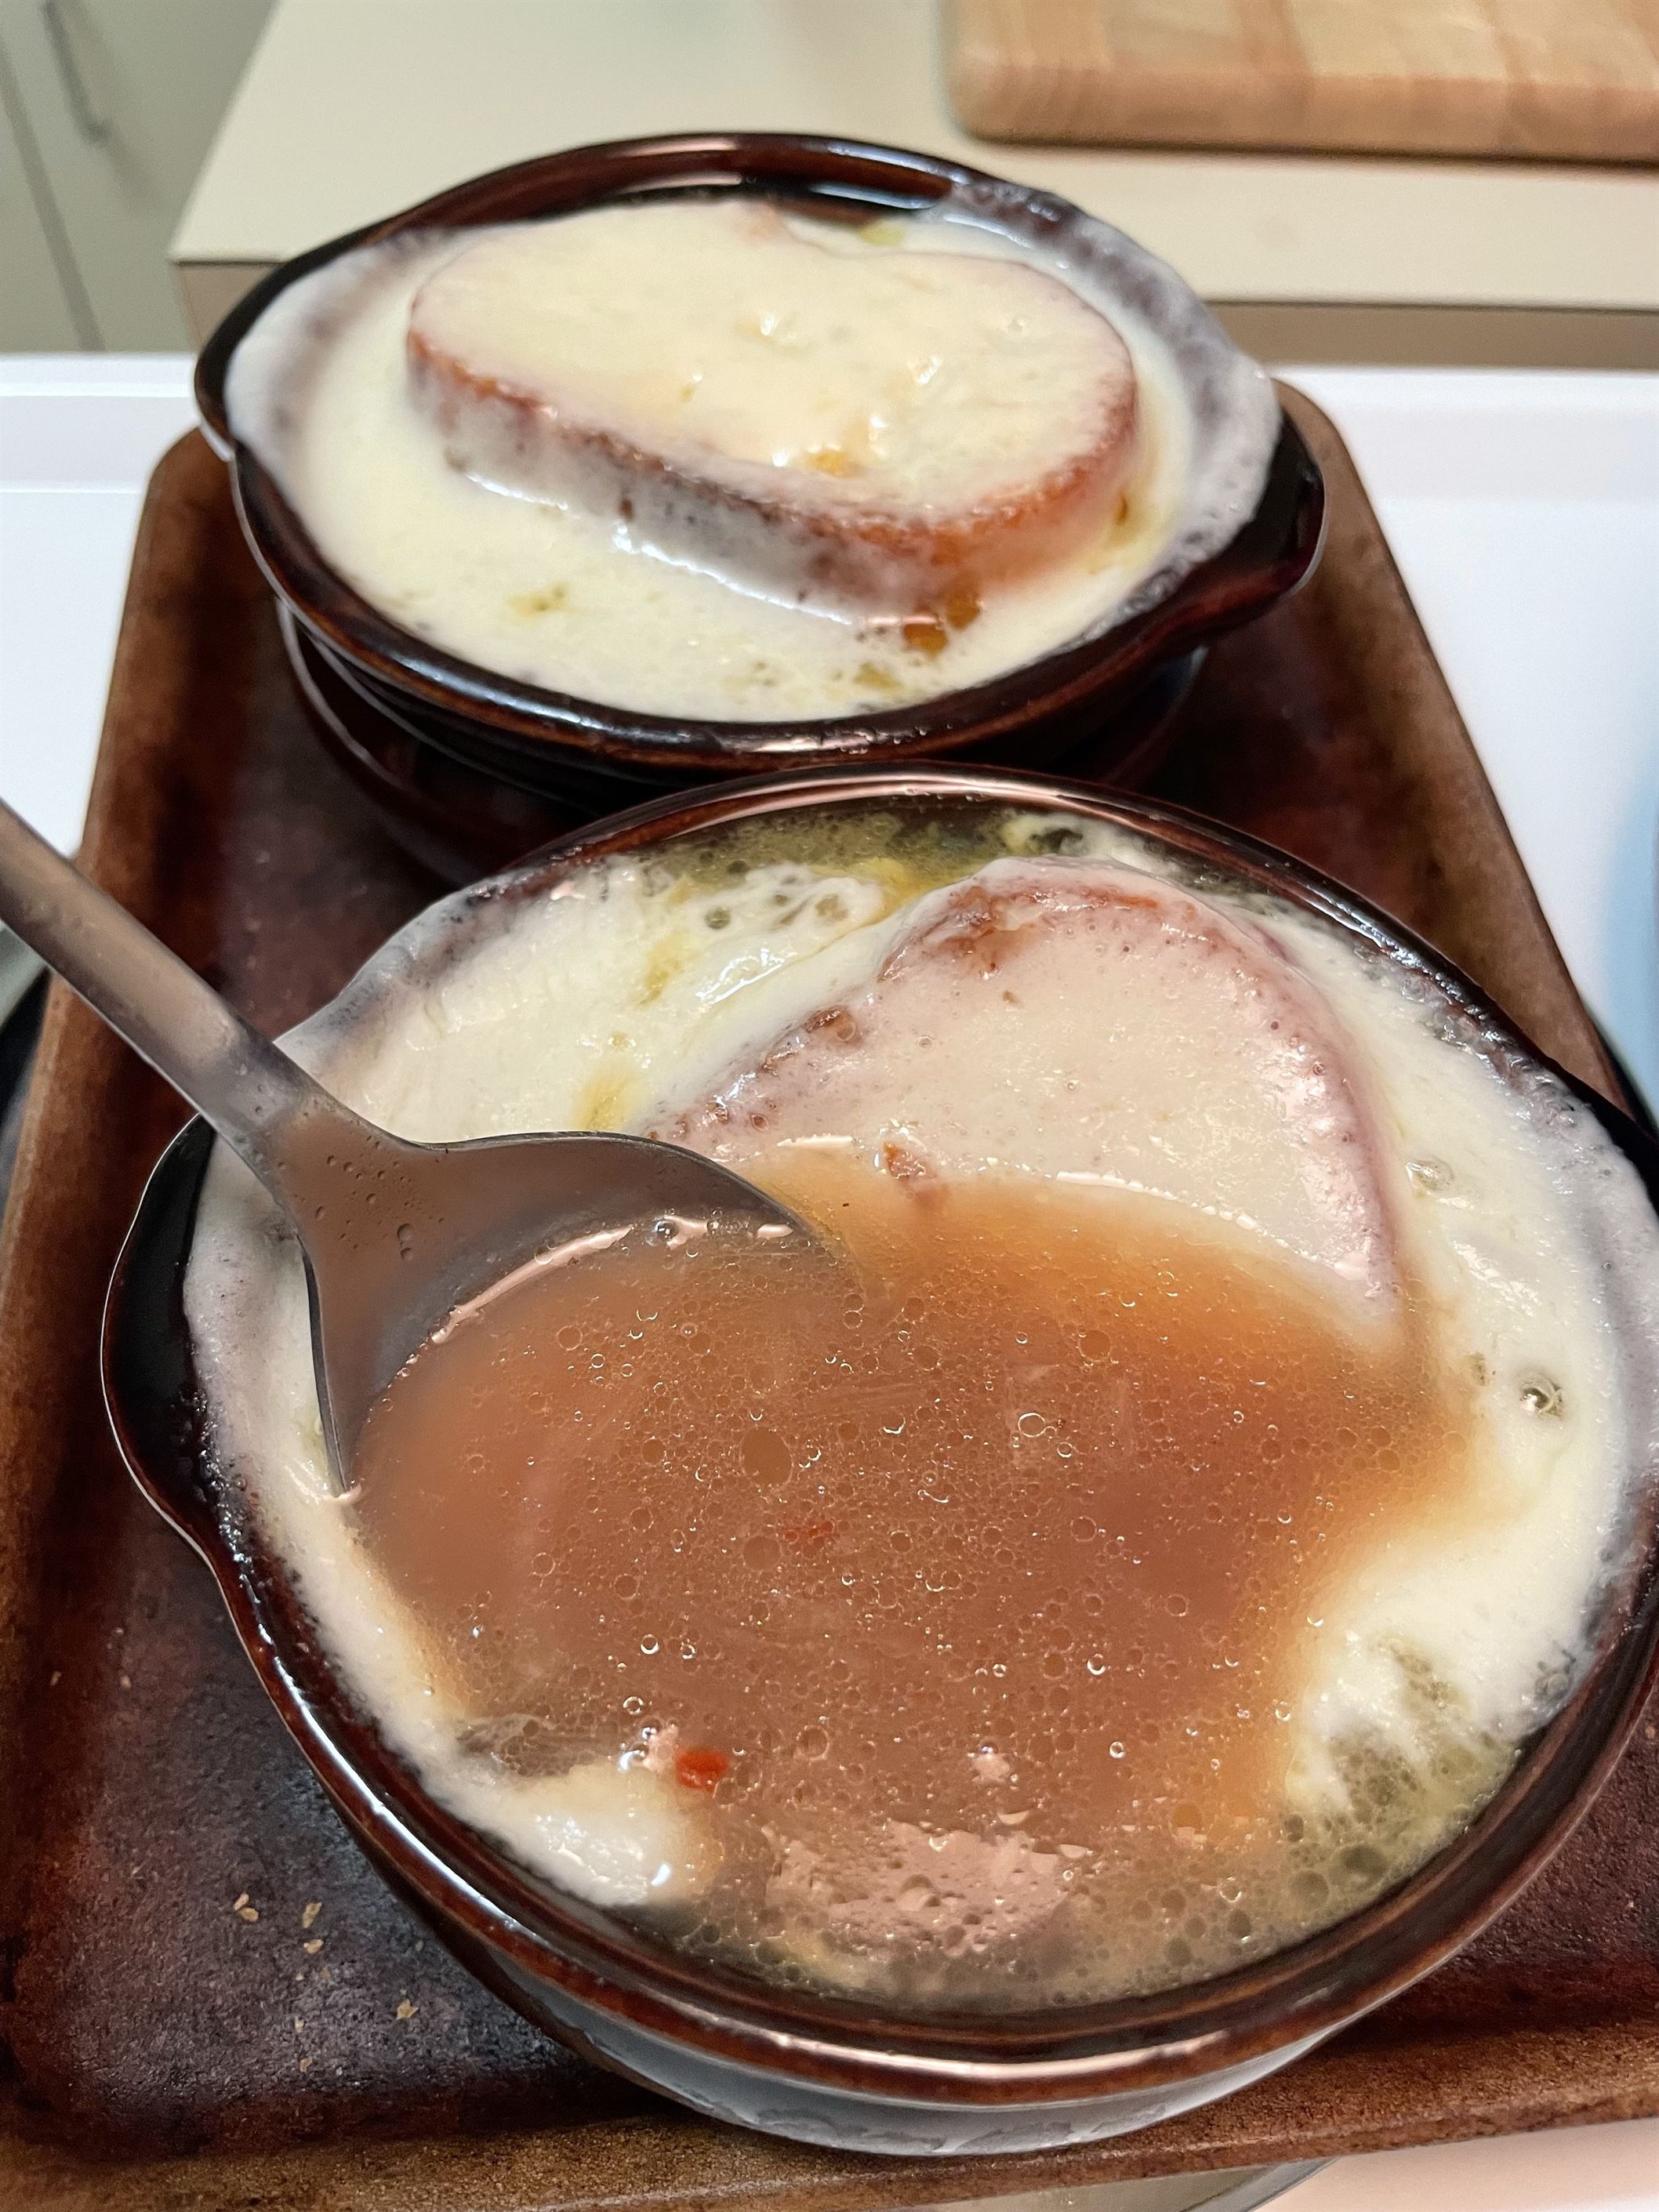 This French onion soup is classic and delicious. Alex Pavljuk | The Montclarion